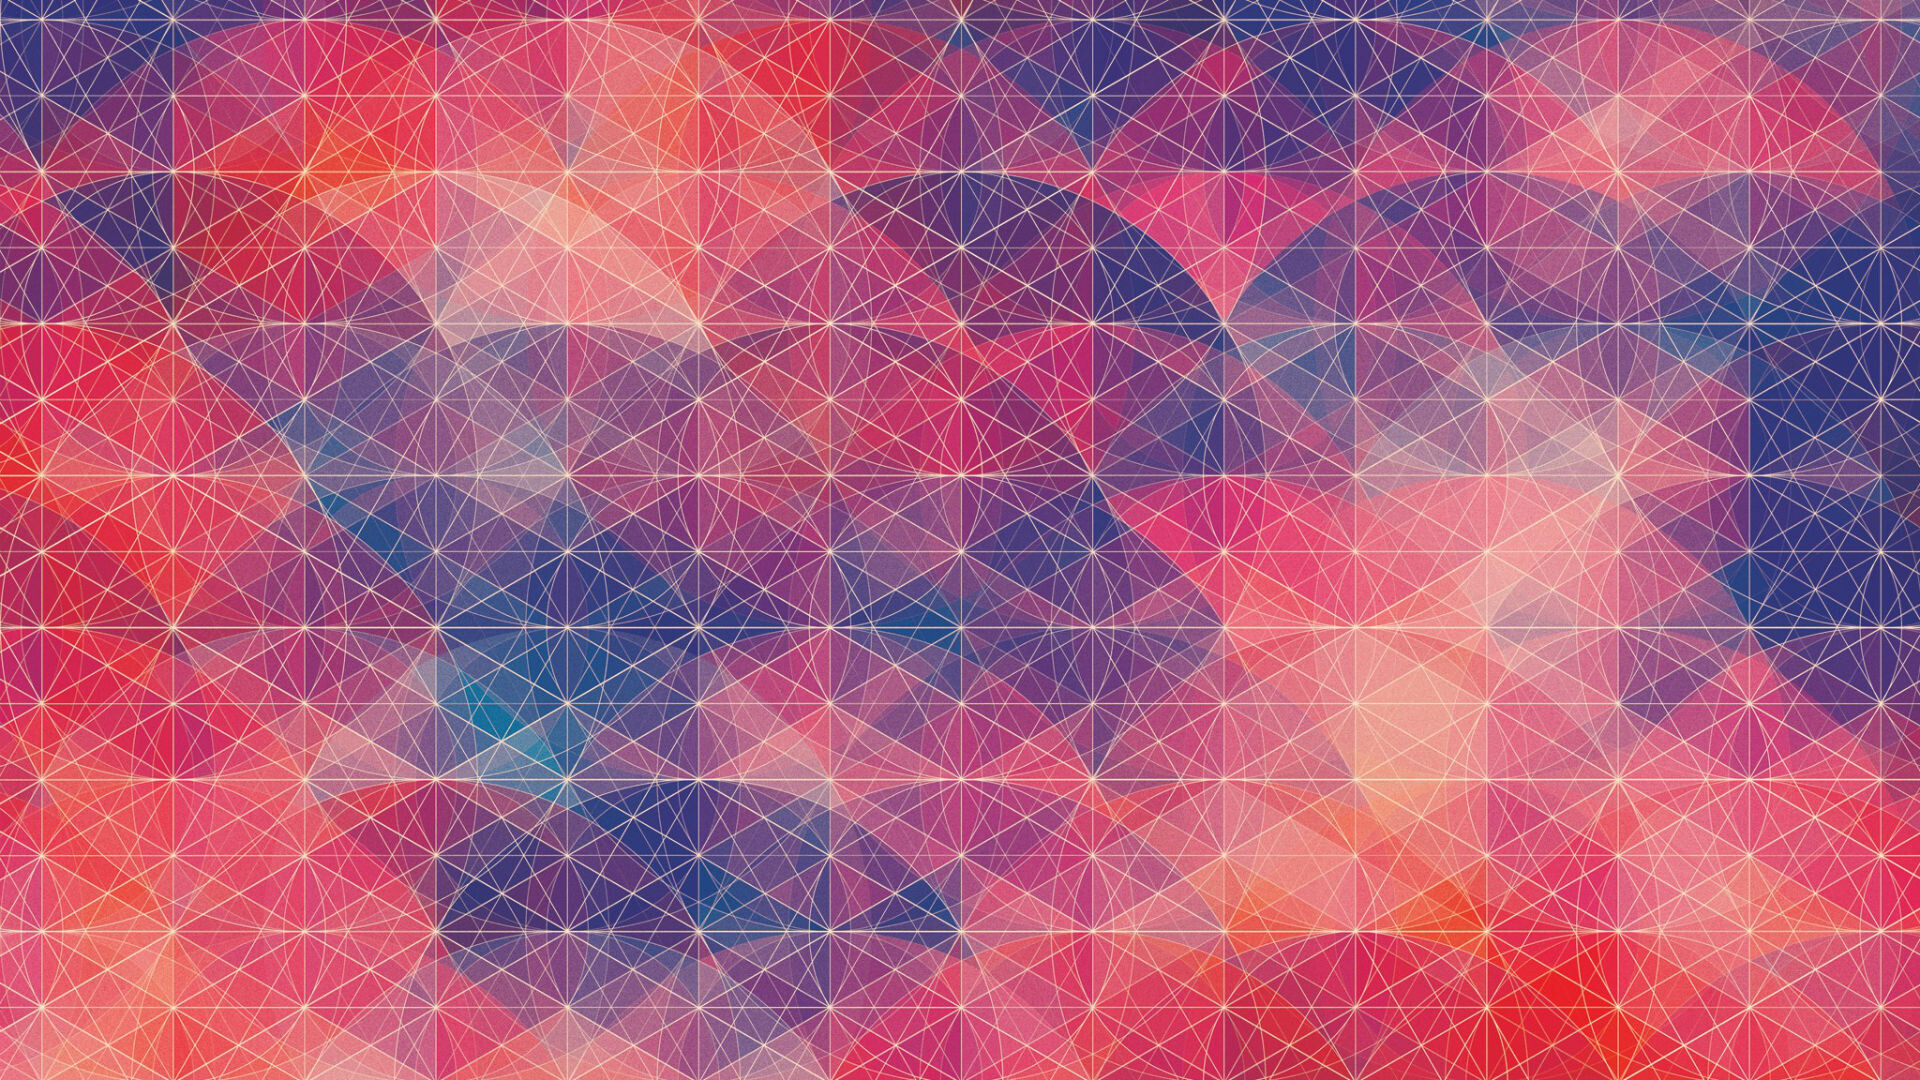 Geometry: Symmetrical pattern, Rectangles, Right angles, Colorfulness. 1920x1080 Full HD Wallpaper.